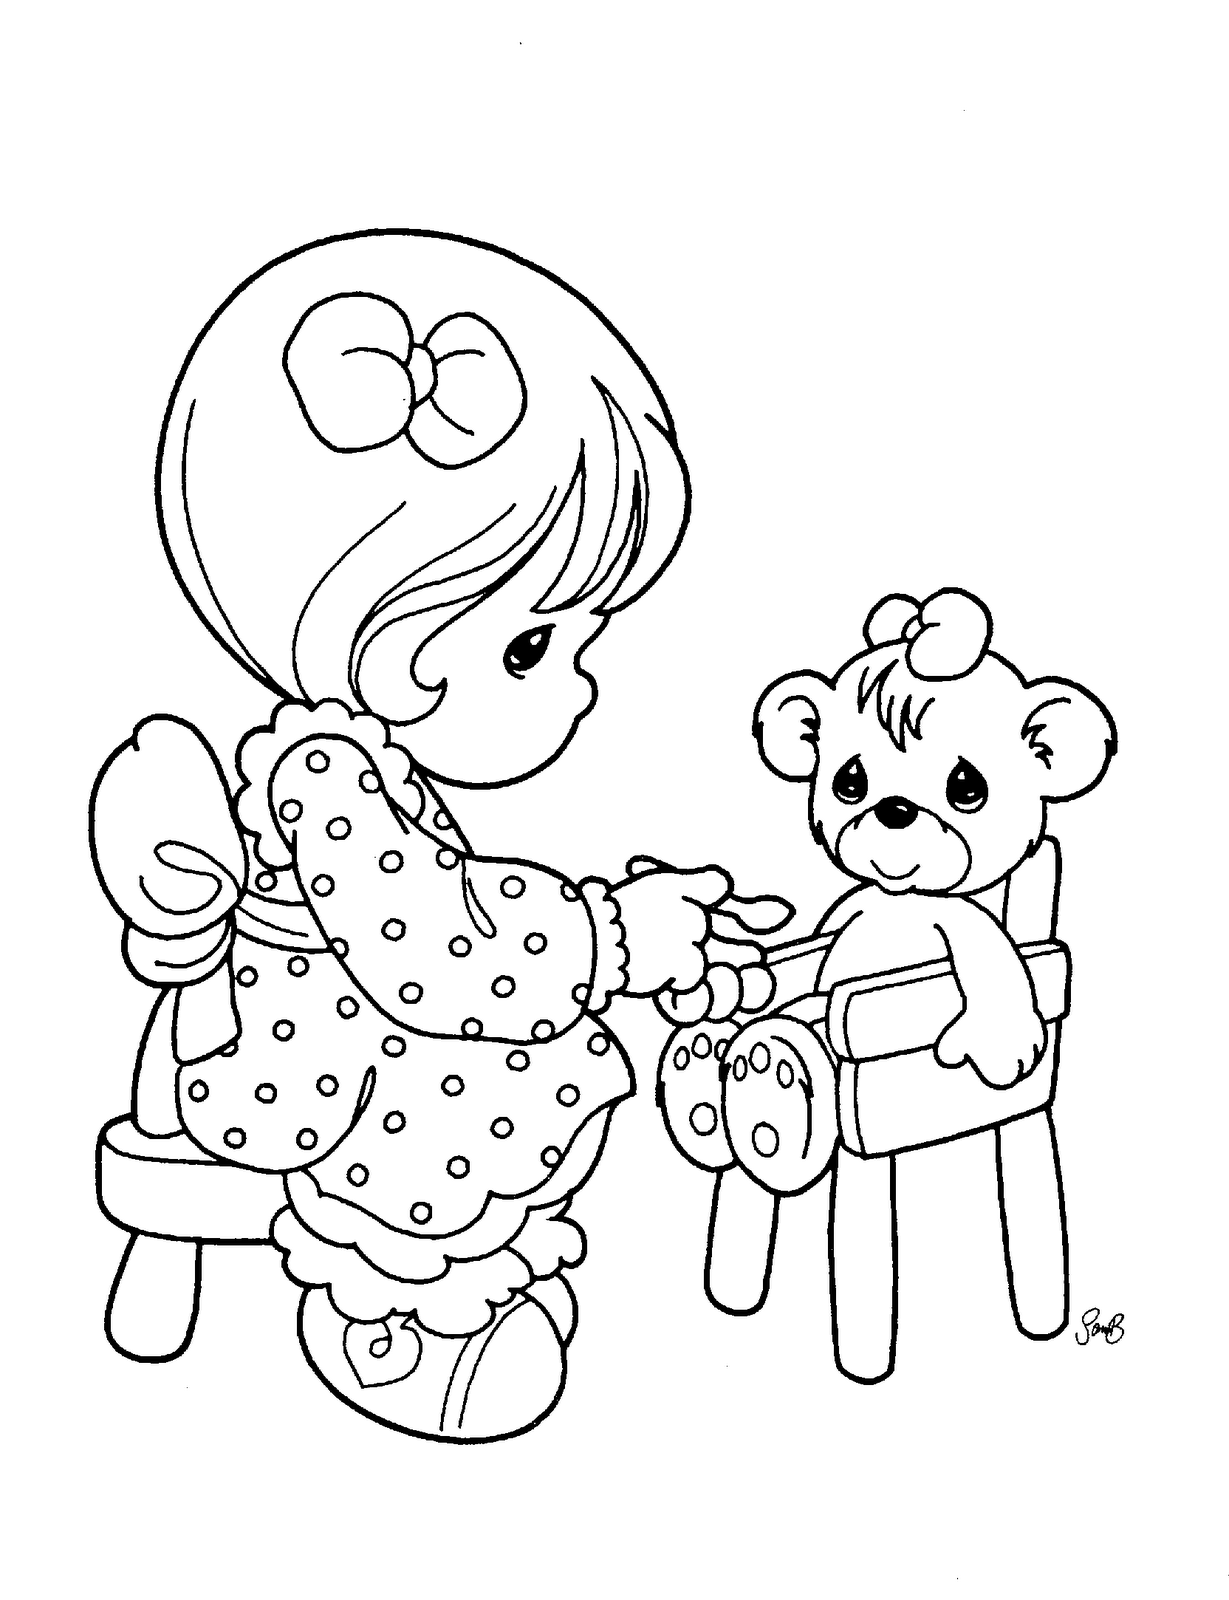 Disney Coloring Pages Precious Moments for Love Coloring Pages